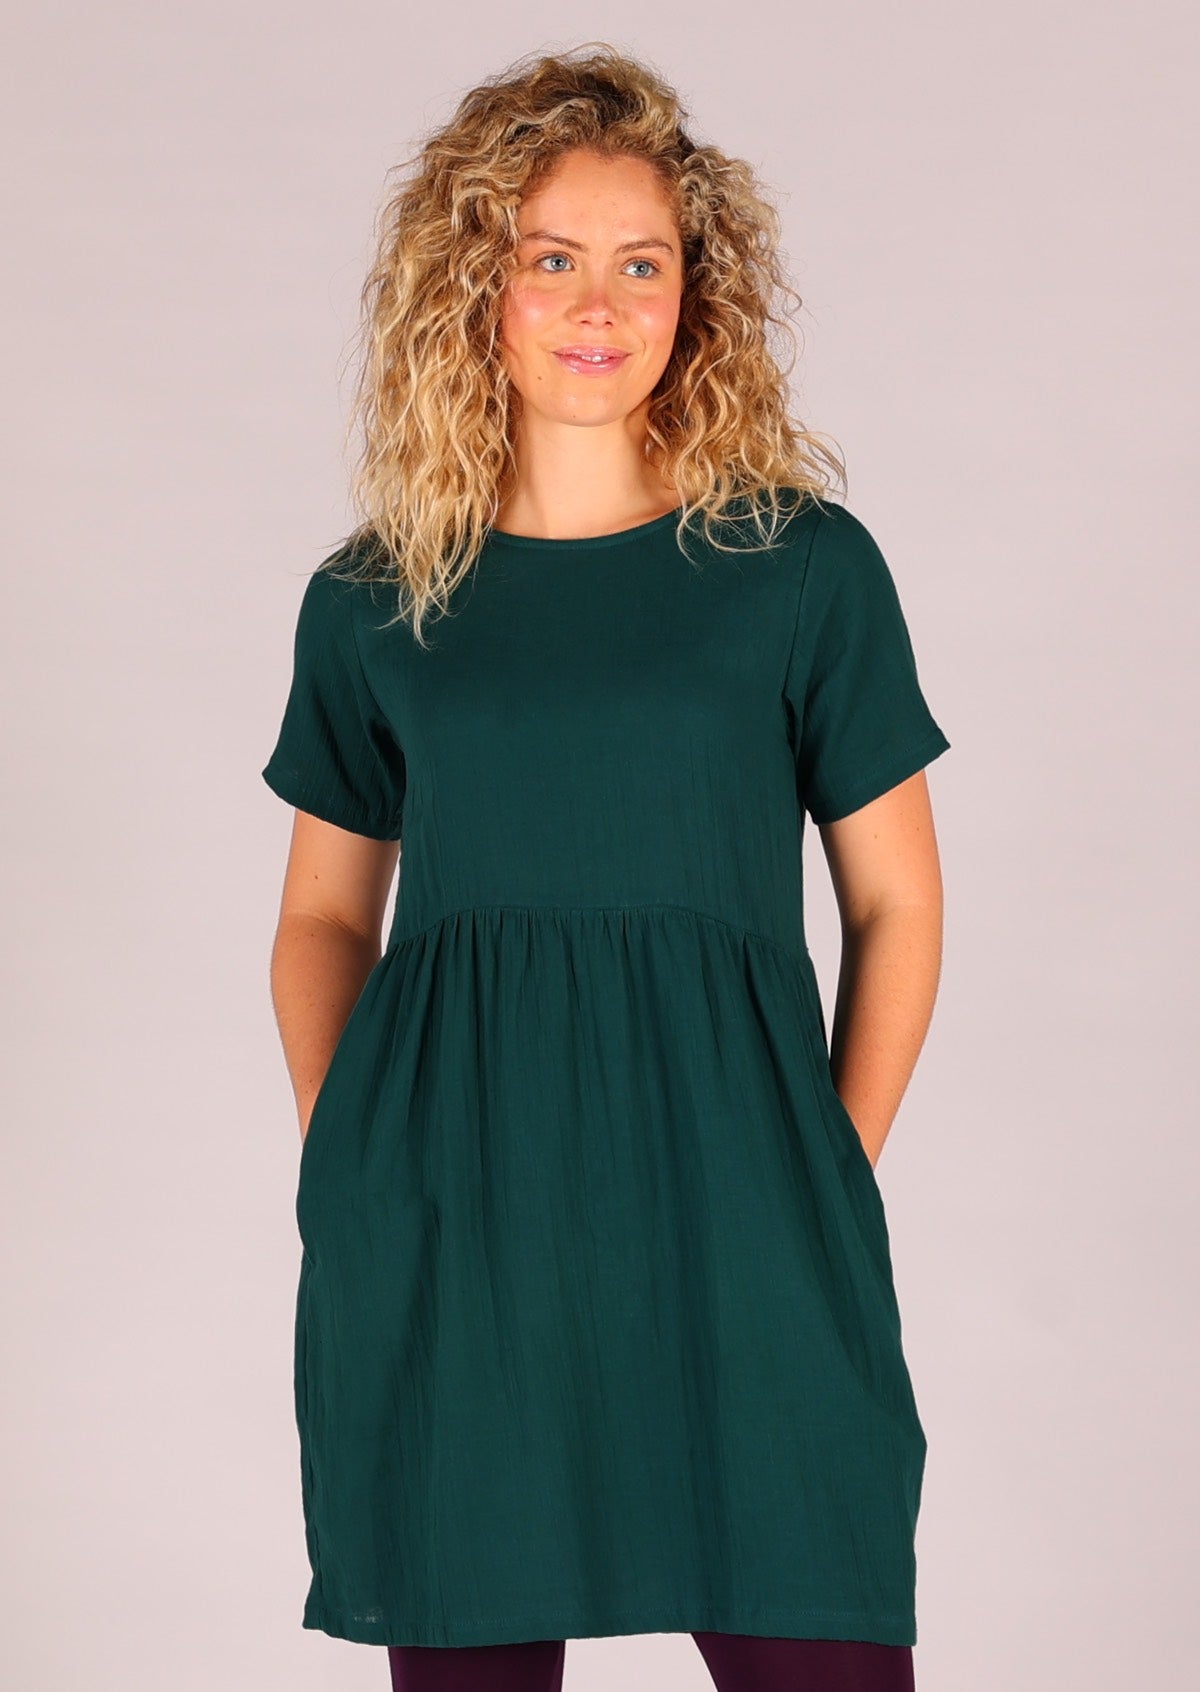 Double cotton relaxed fit dress with T-shirt sleeves, high round neckline and hidden side pockets